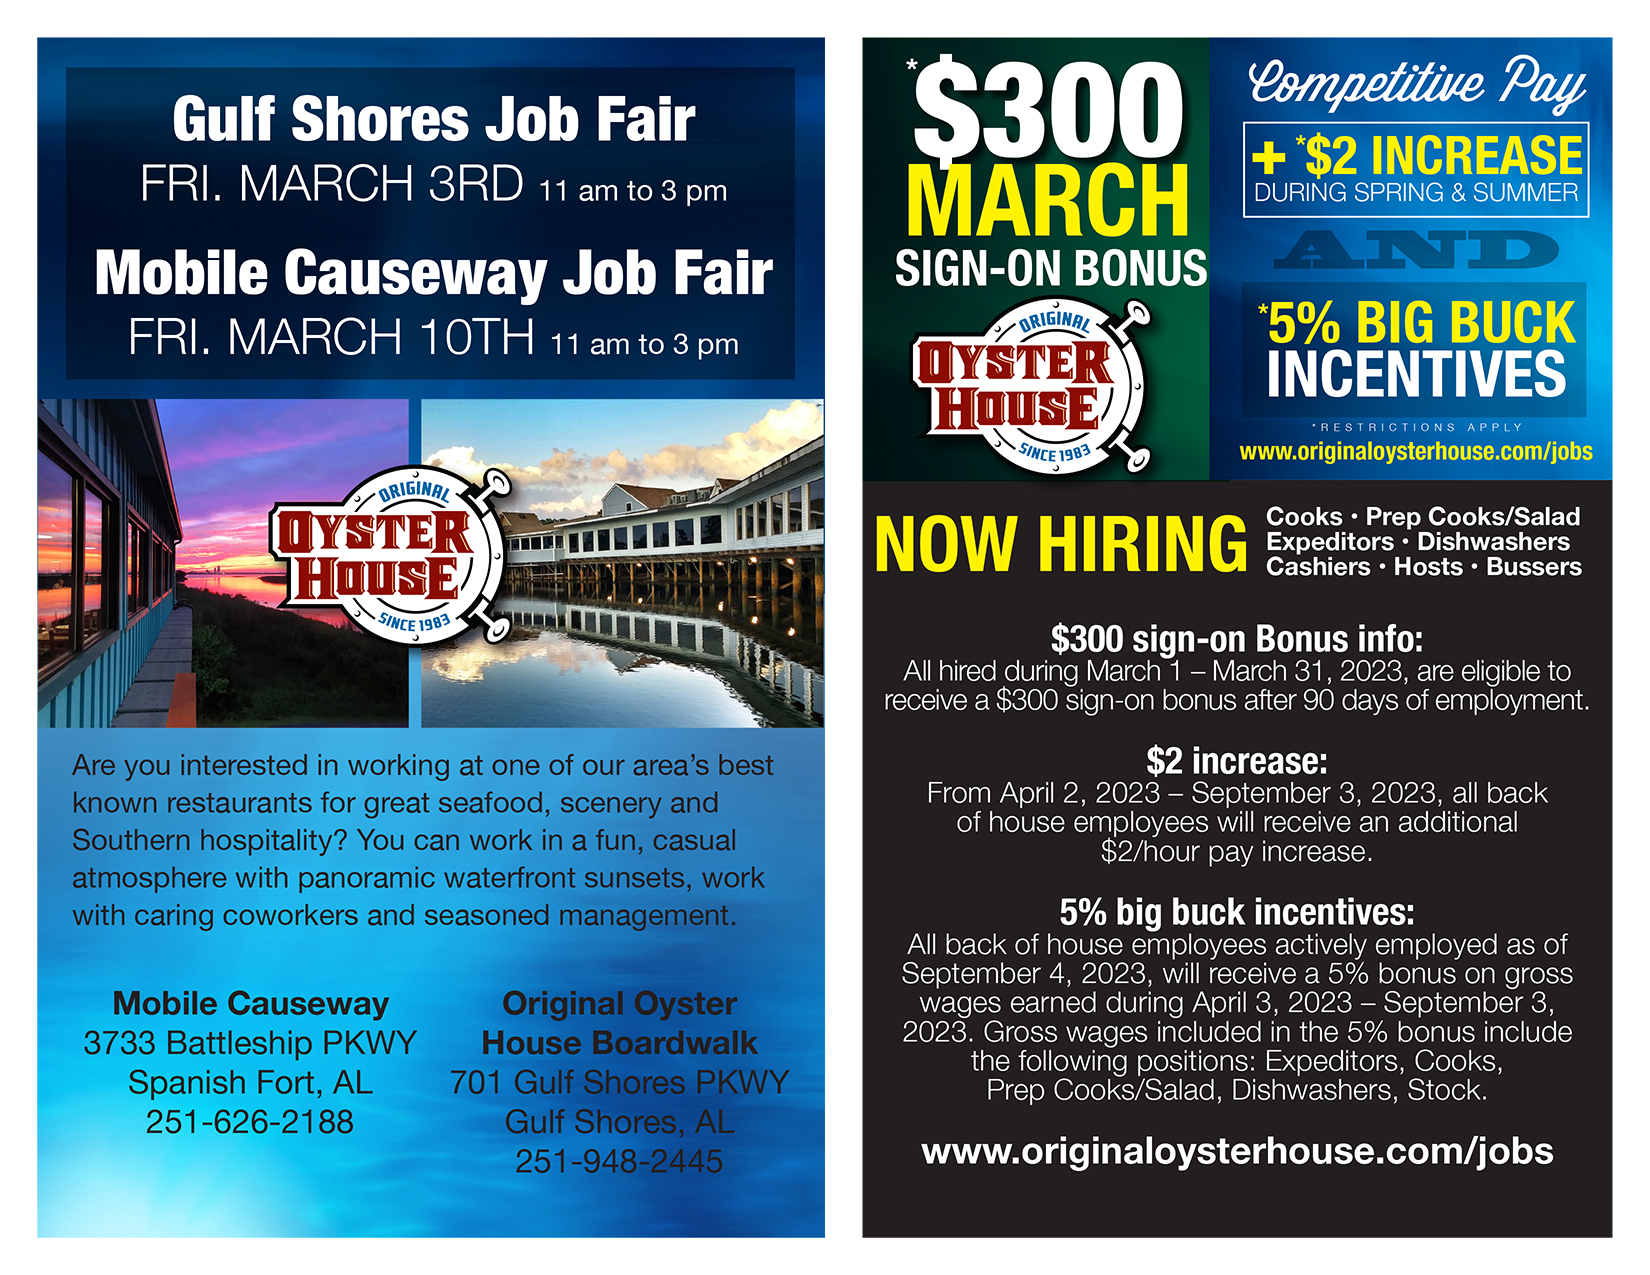 Job Fair planned for March 3rd in Gulf Shores and March 10th at the Mobile Causeway Location from 11 am to 3 pm.